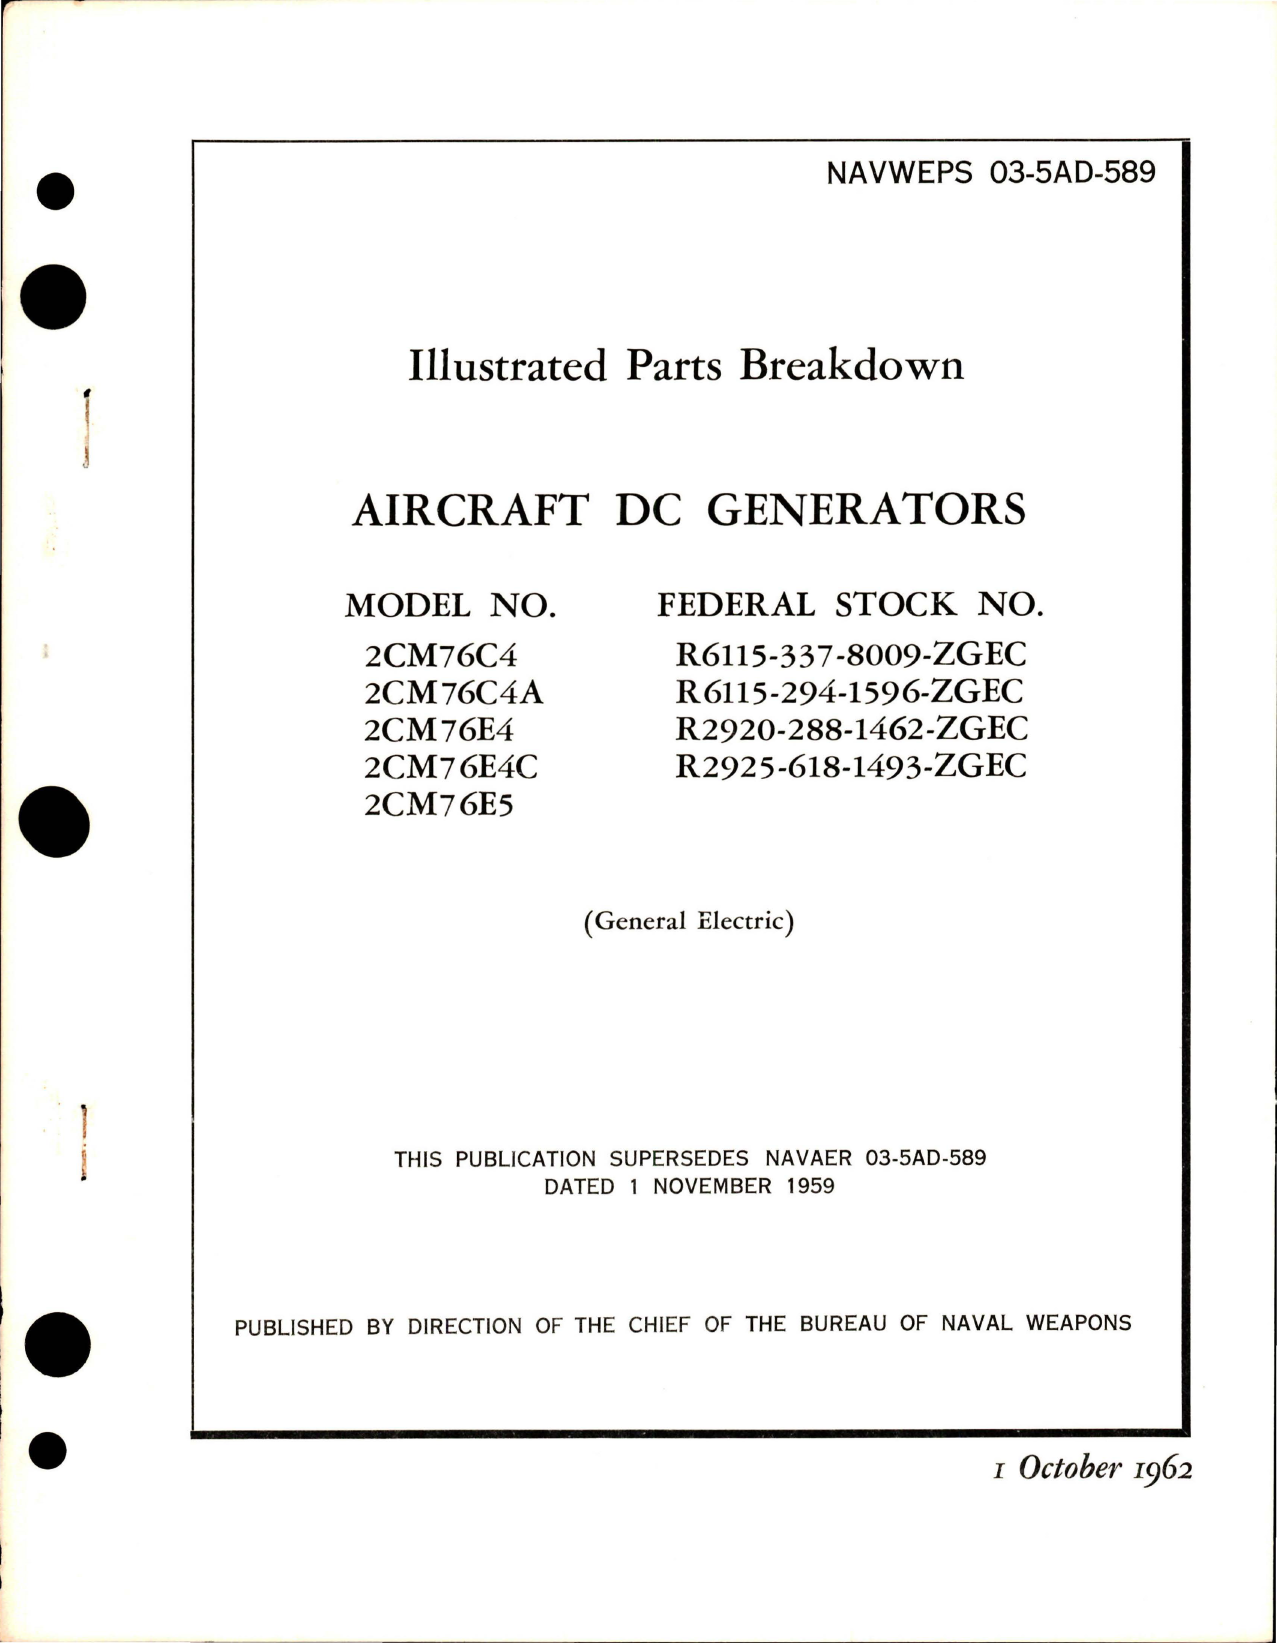 Sample page 1 from AirCorps Library document: Illustrated Parts Breakdown for DC Generators - Models 2CM76C4, 2CM76C4A, 2CM76E4, 2CM76E4C, 2CM76E5